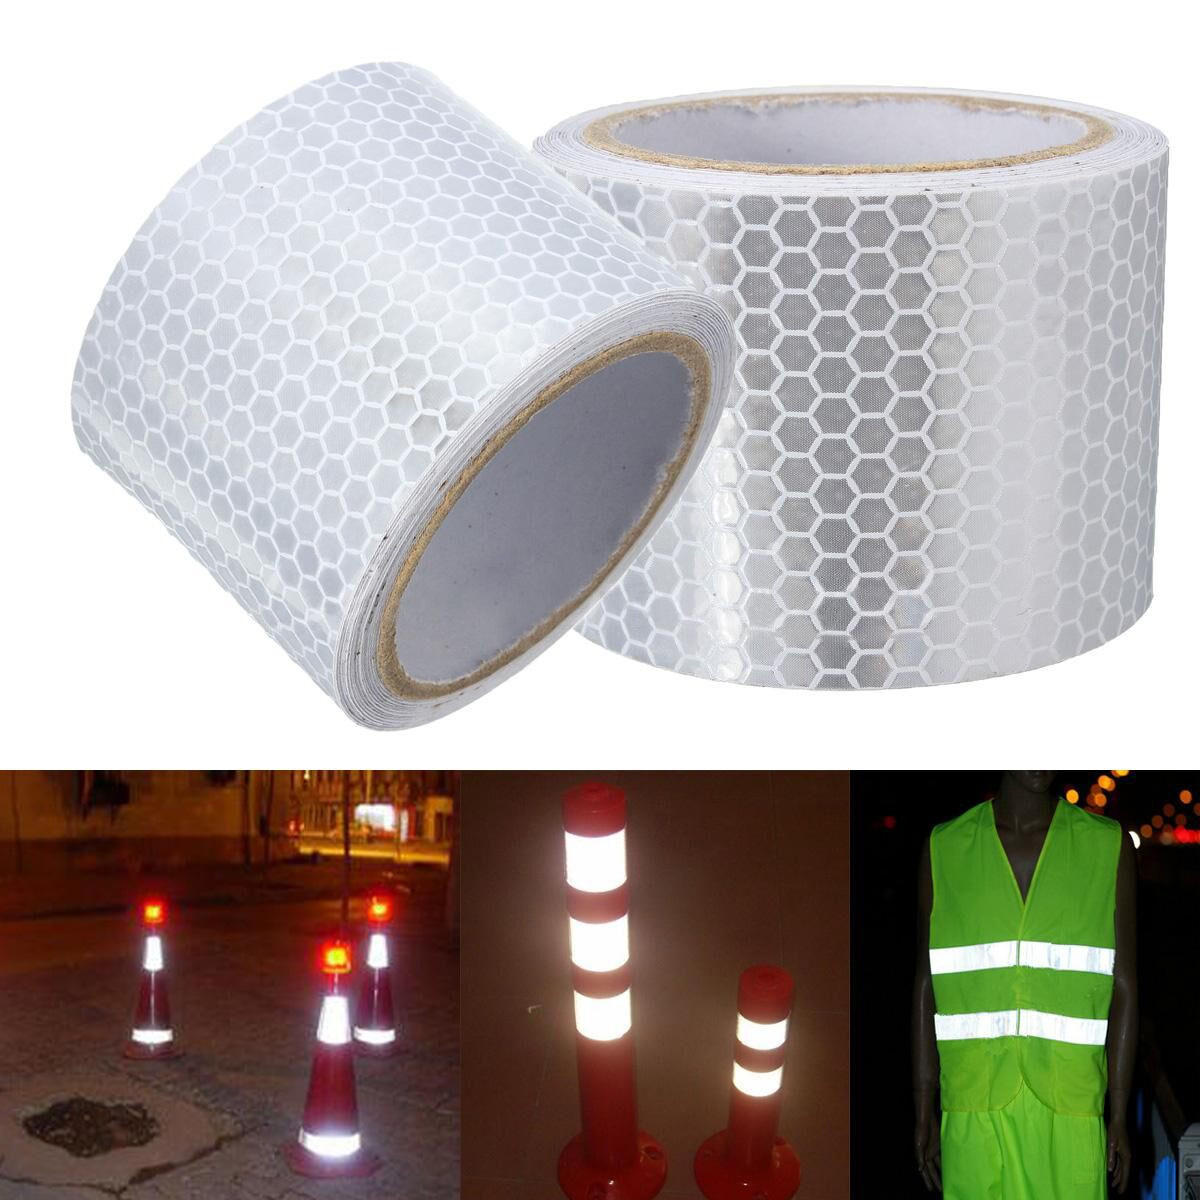 5cm X 3m Silver White Reflective Safety Warning Conspicuity Tape Sticker Film